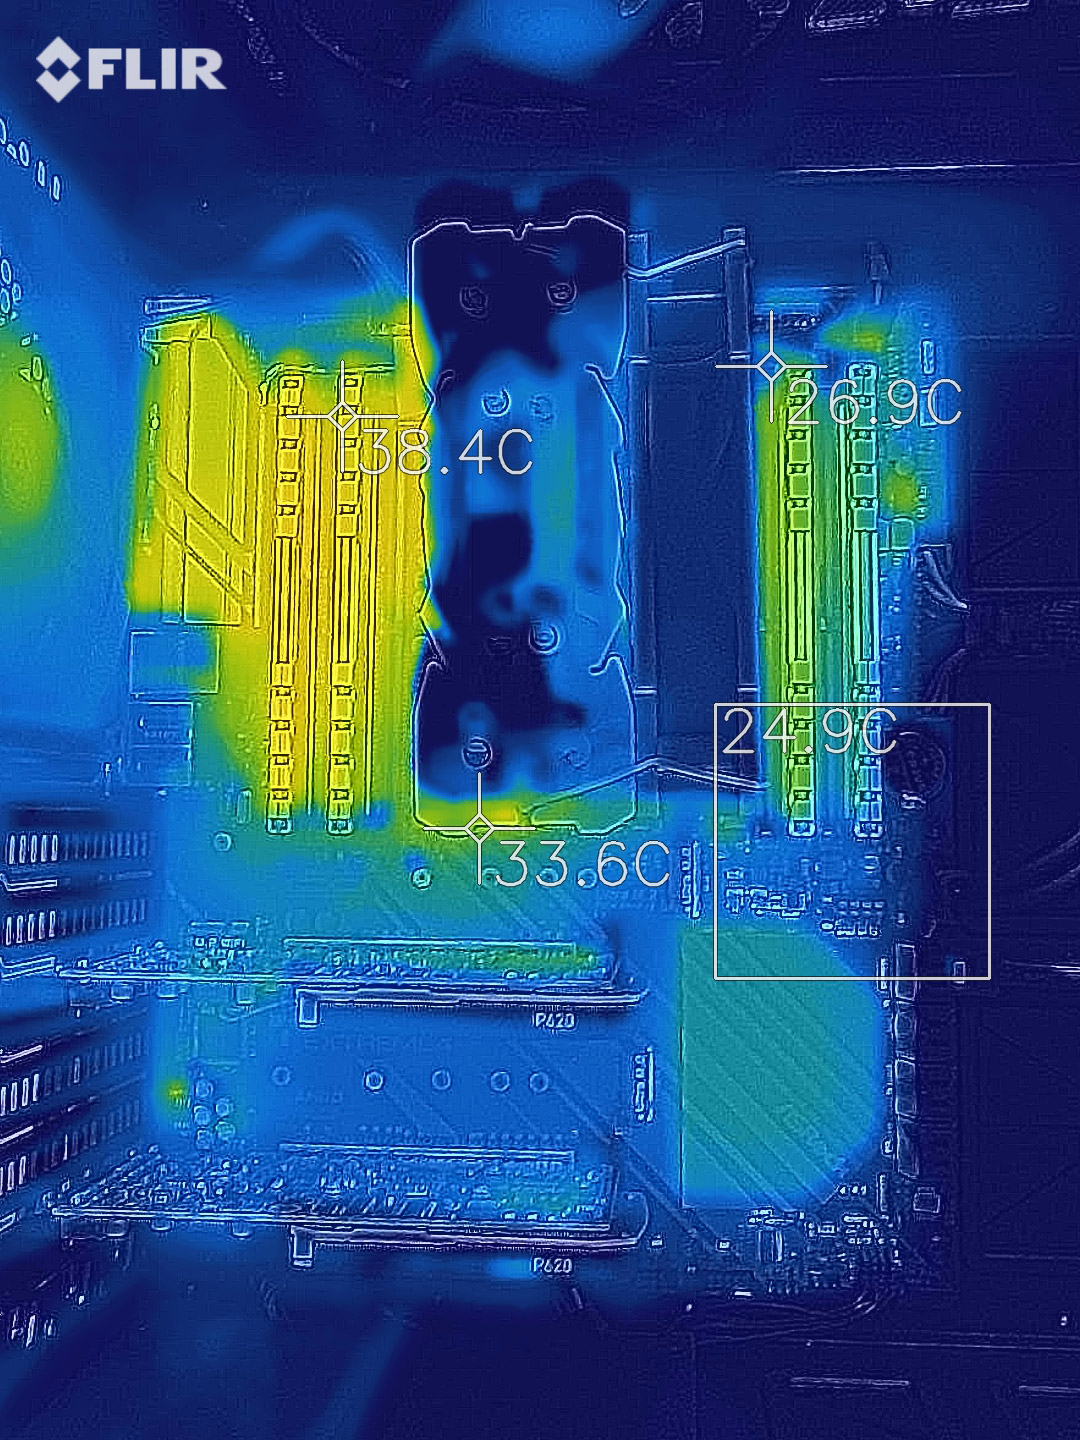 Falcon Thermal Imaging - Trading Computers & Thermals